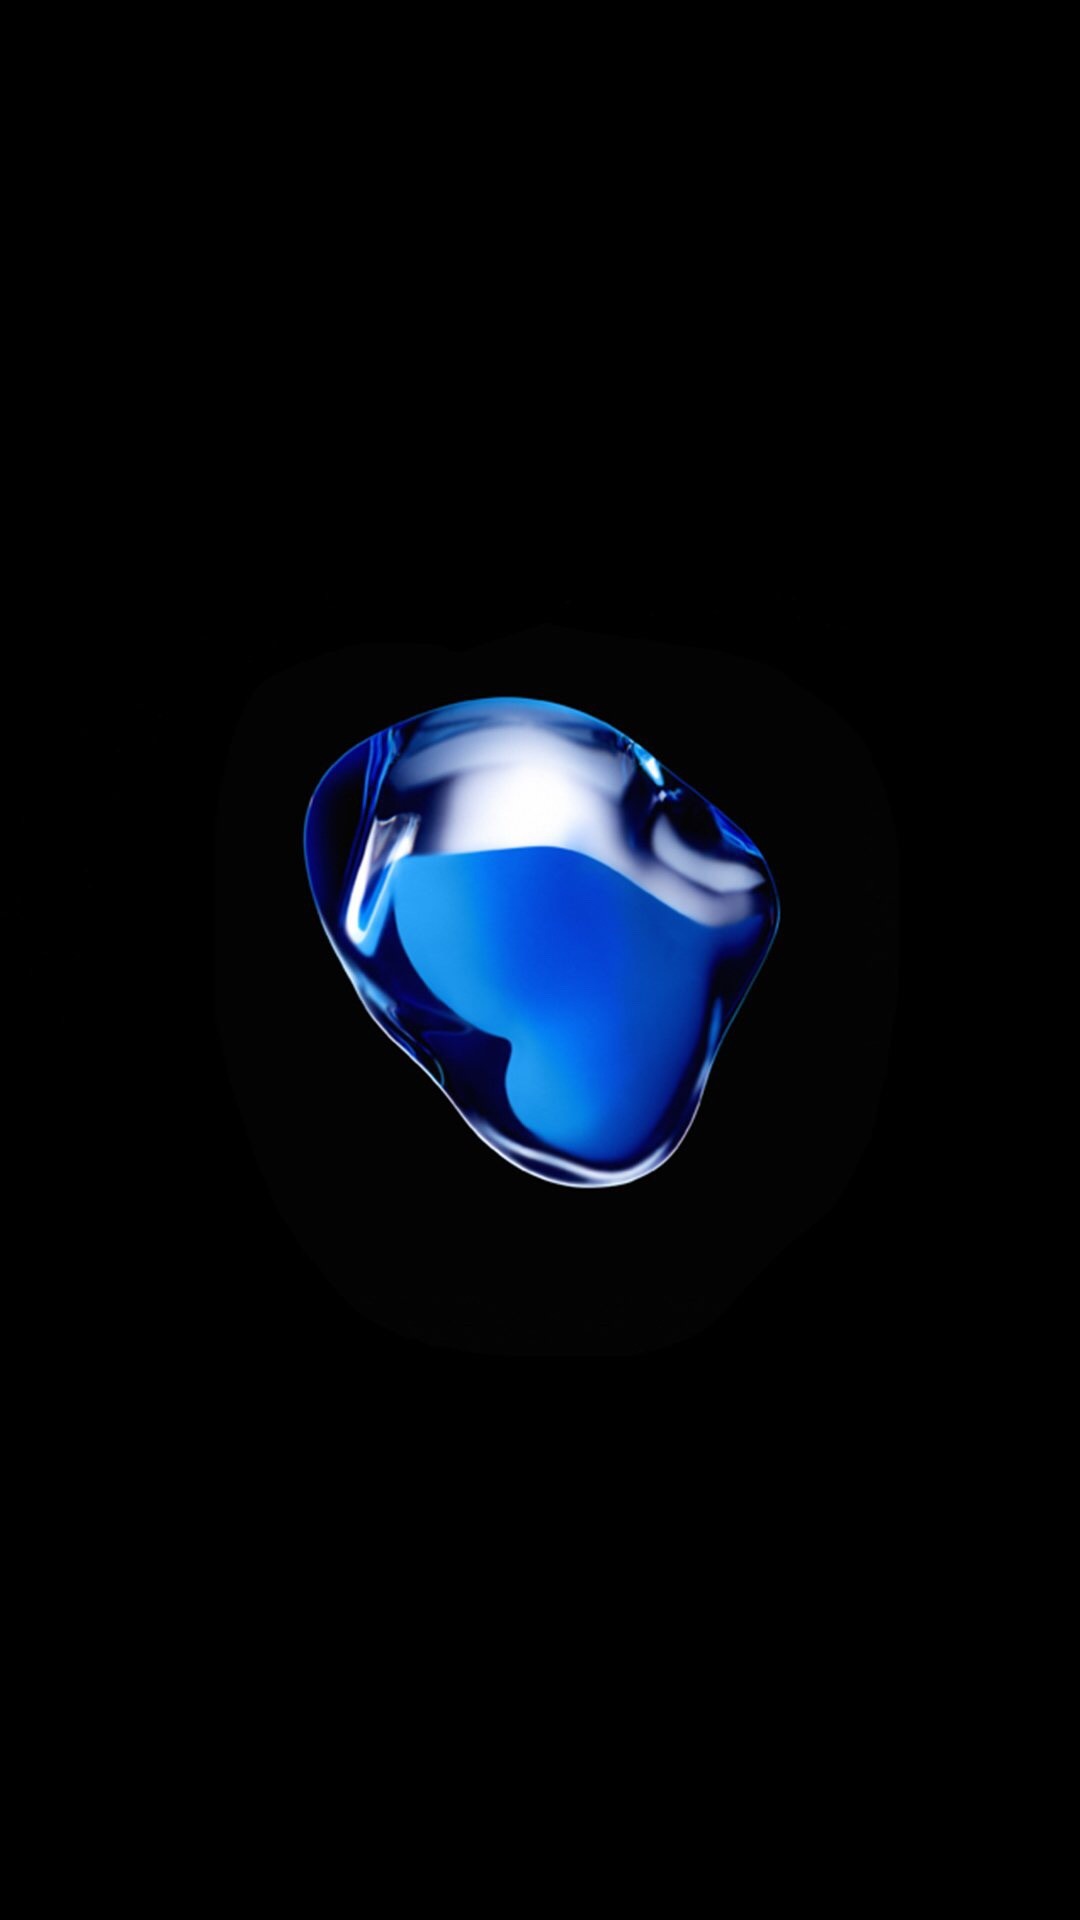 The Blue blob wallpaper in the iPhone 7 ads-img_0365.jpg